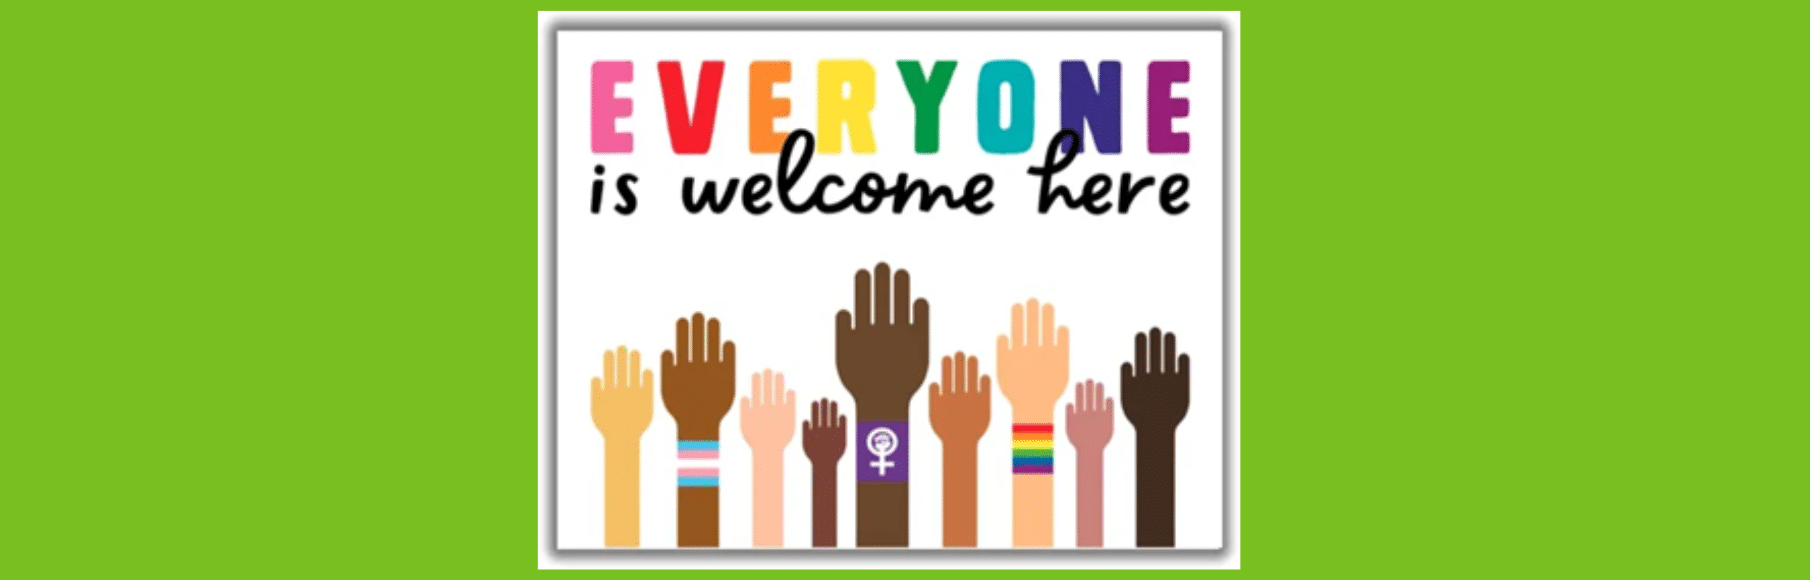 Everyone is Welcome here image, hands raised showing diverse genders and religion